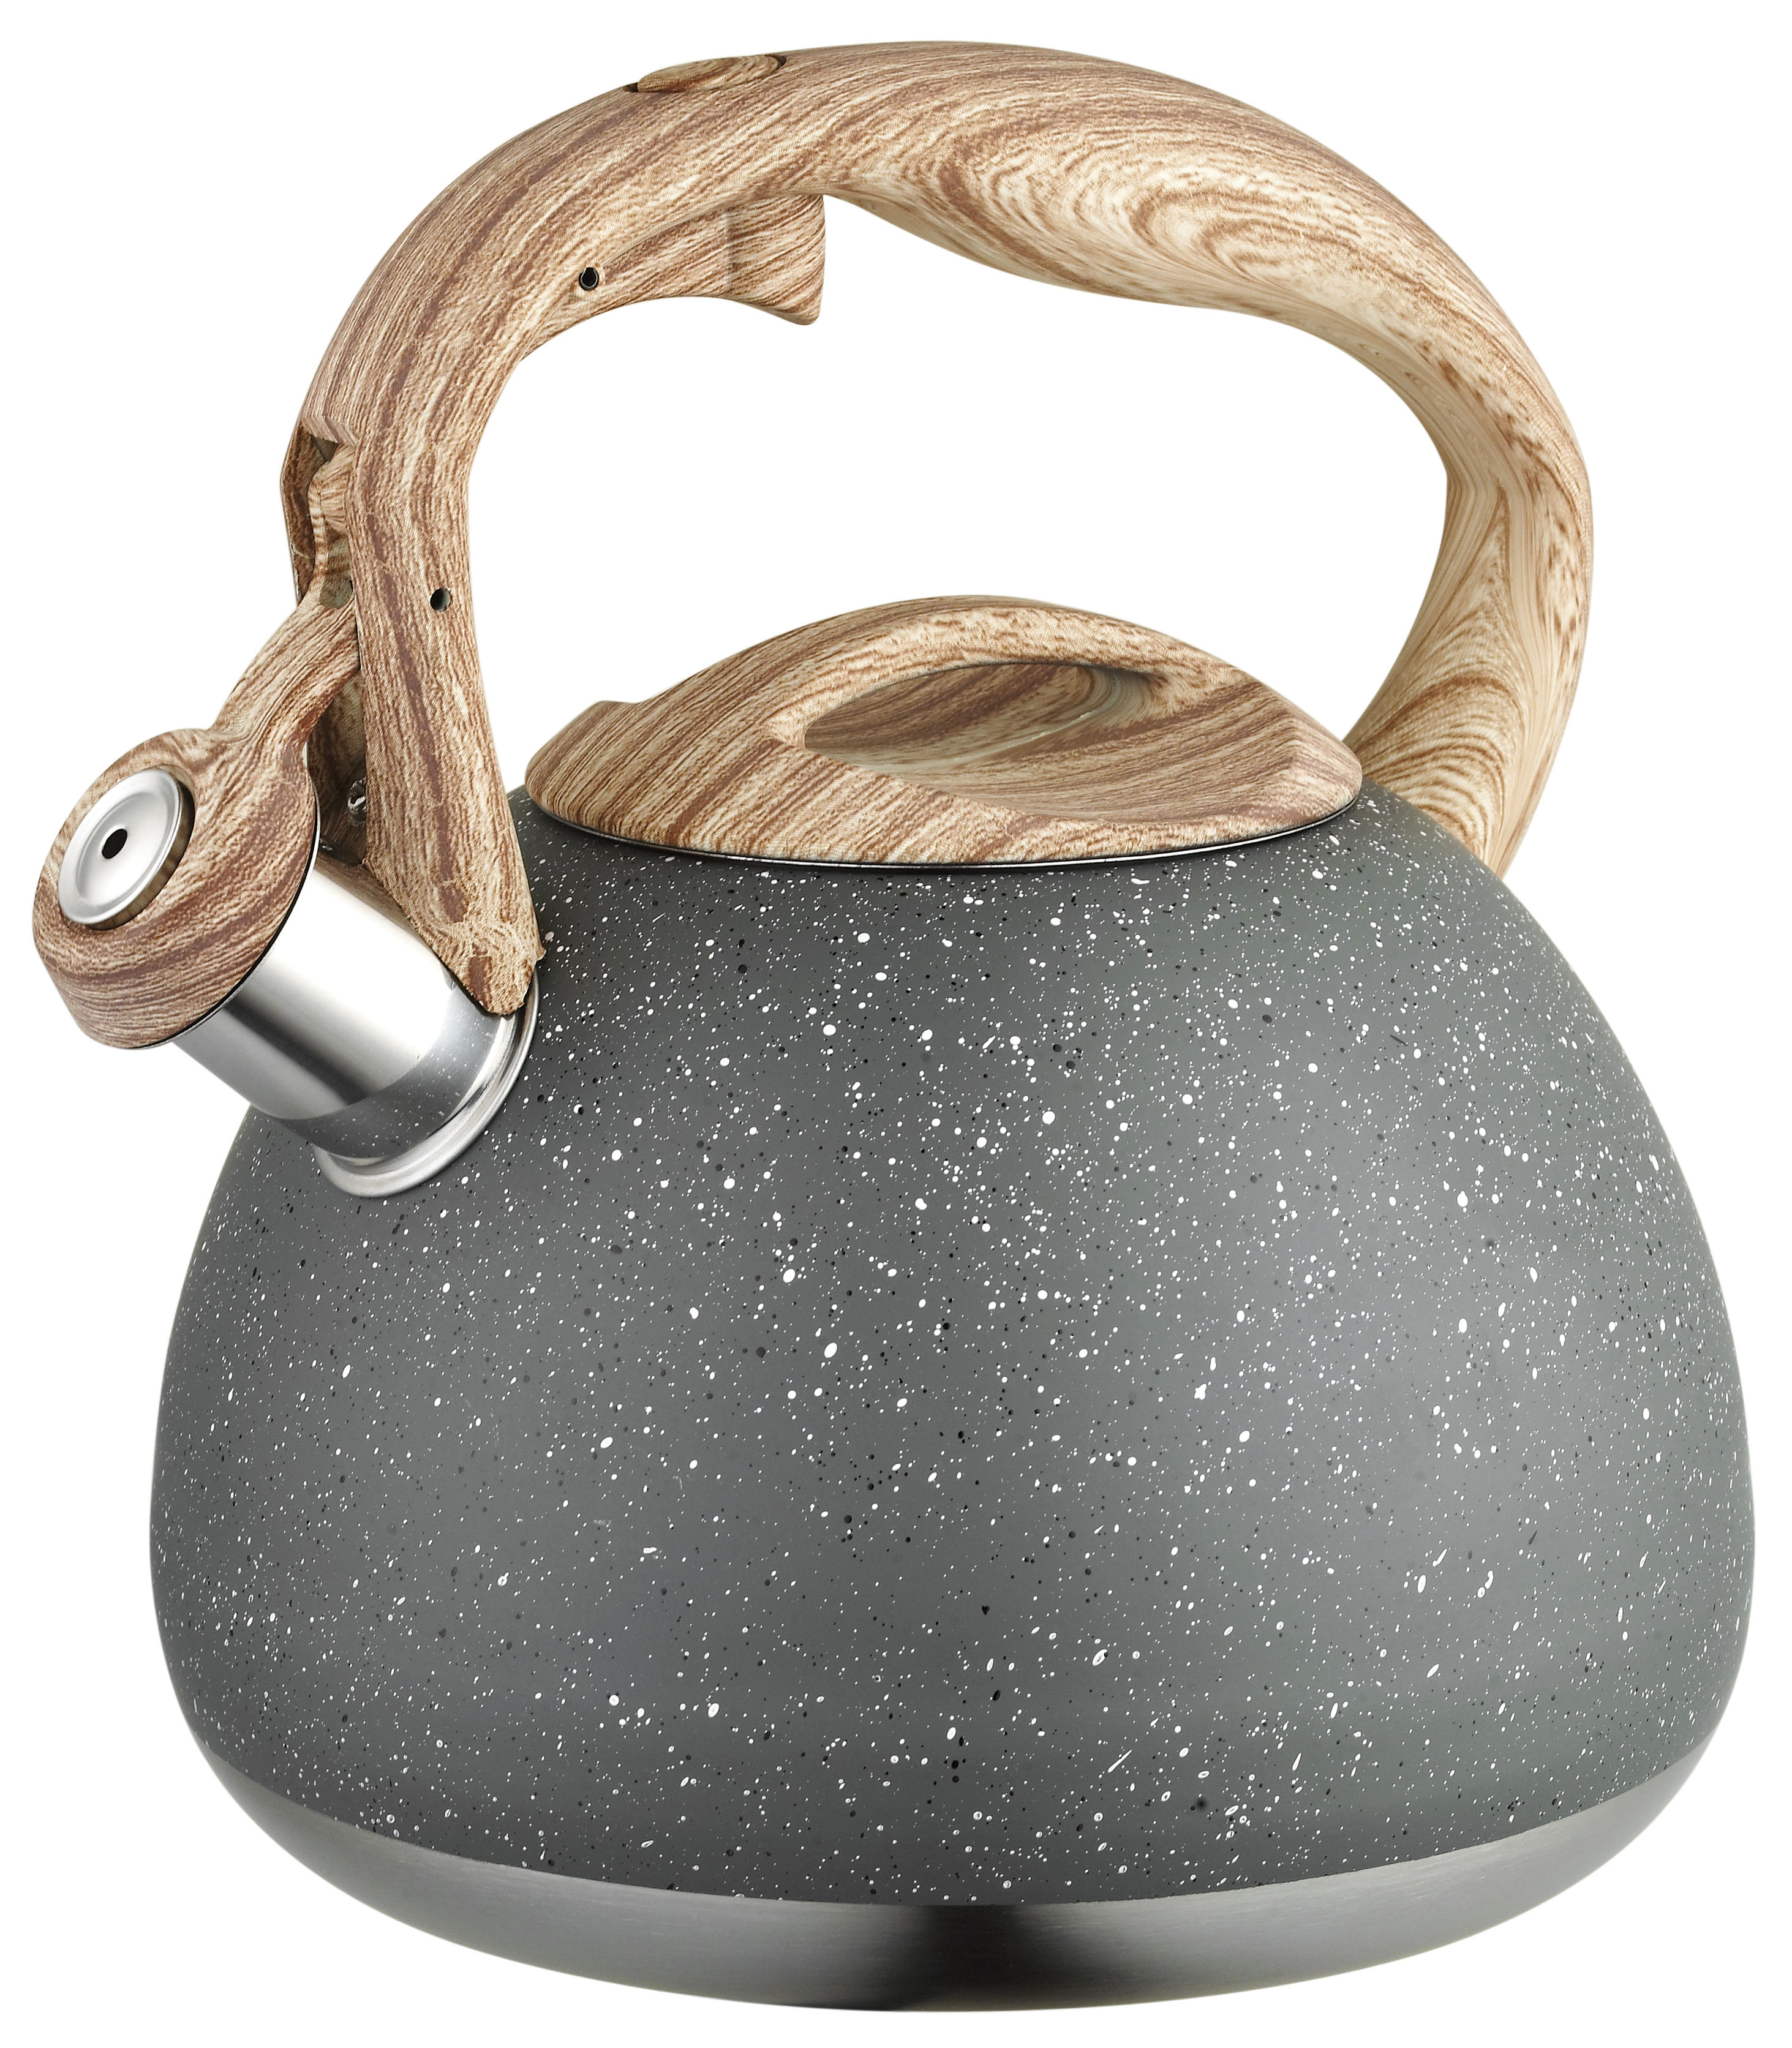 Nice Designed Colorful Whistling Tea Kettle Stainless Steel